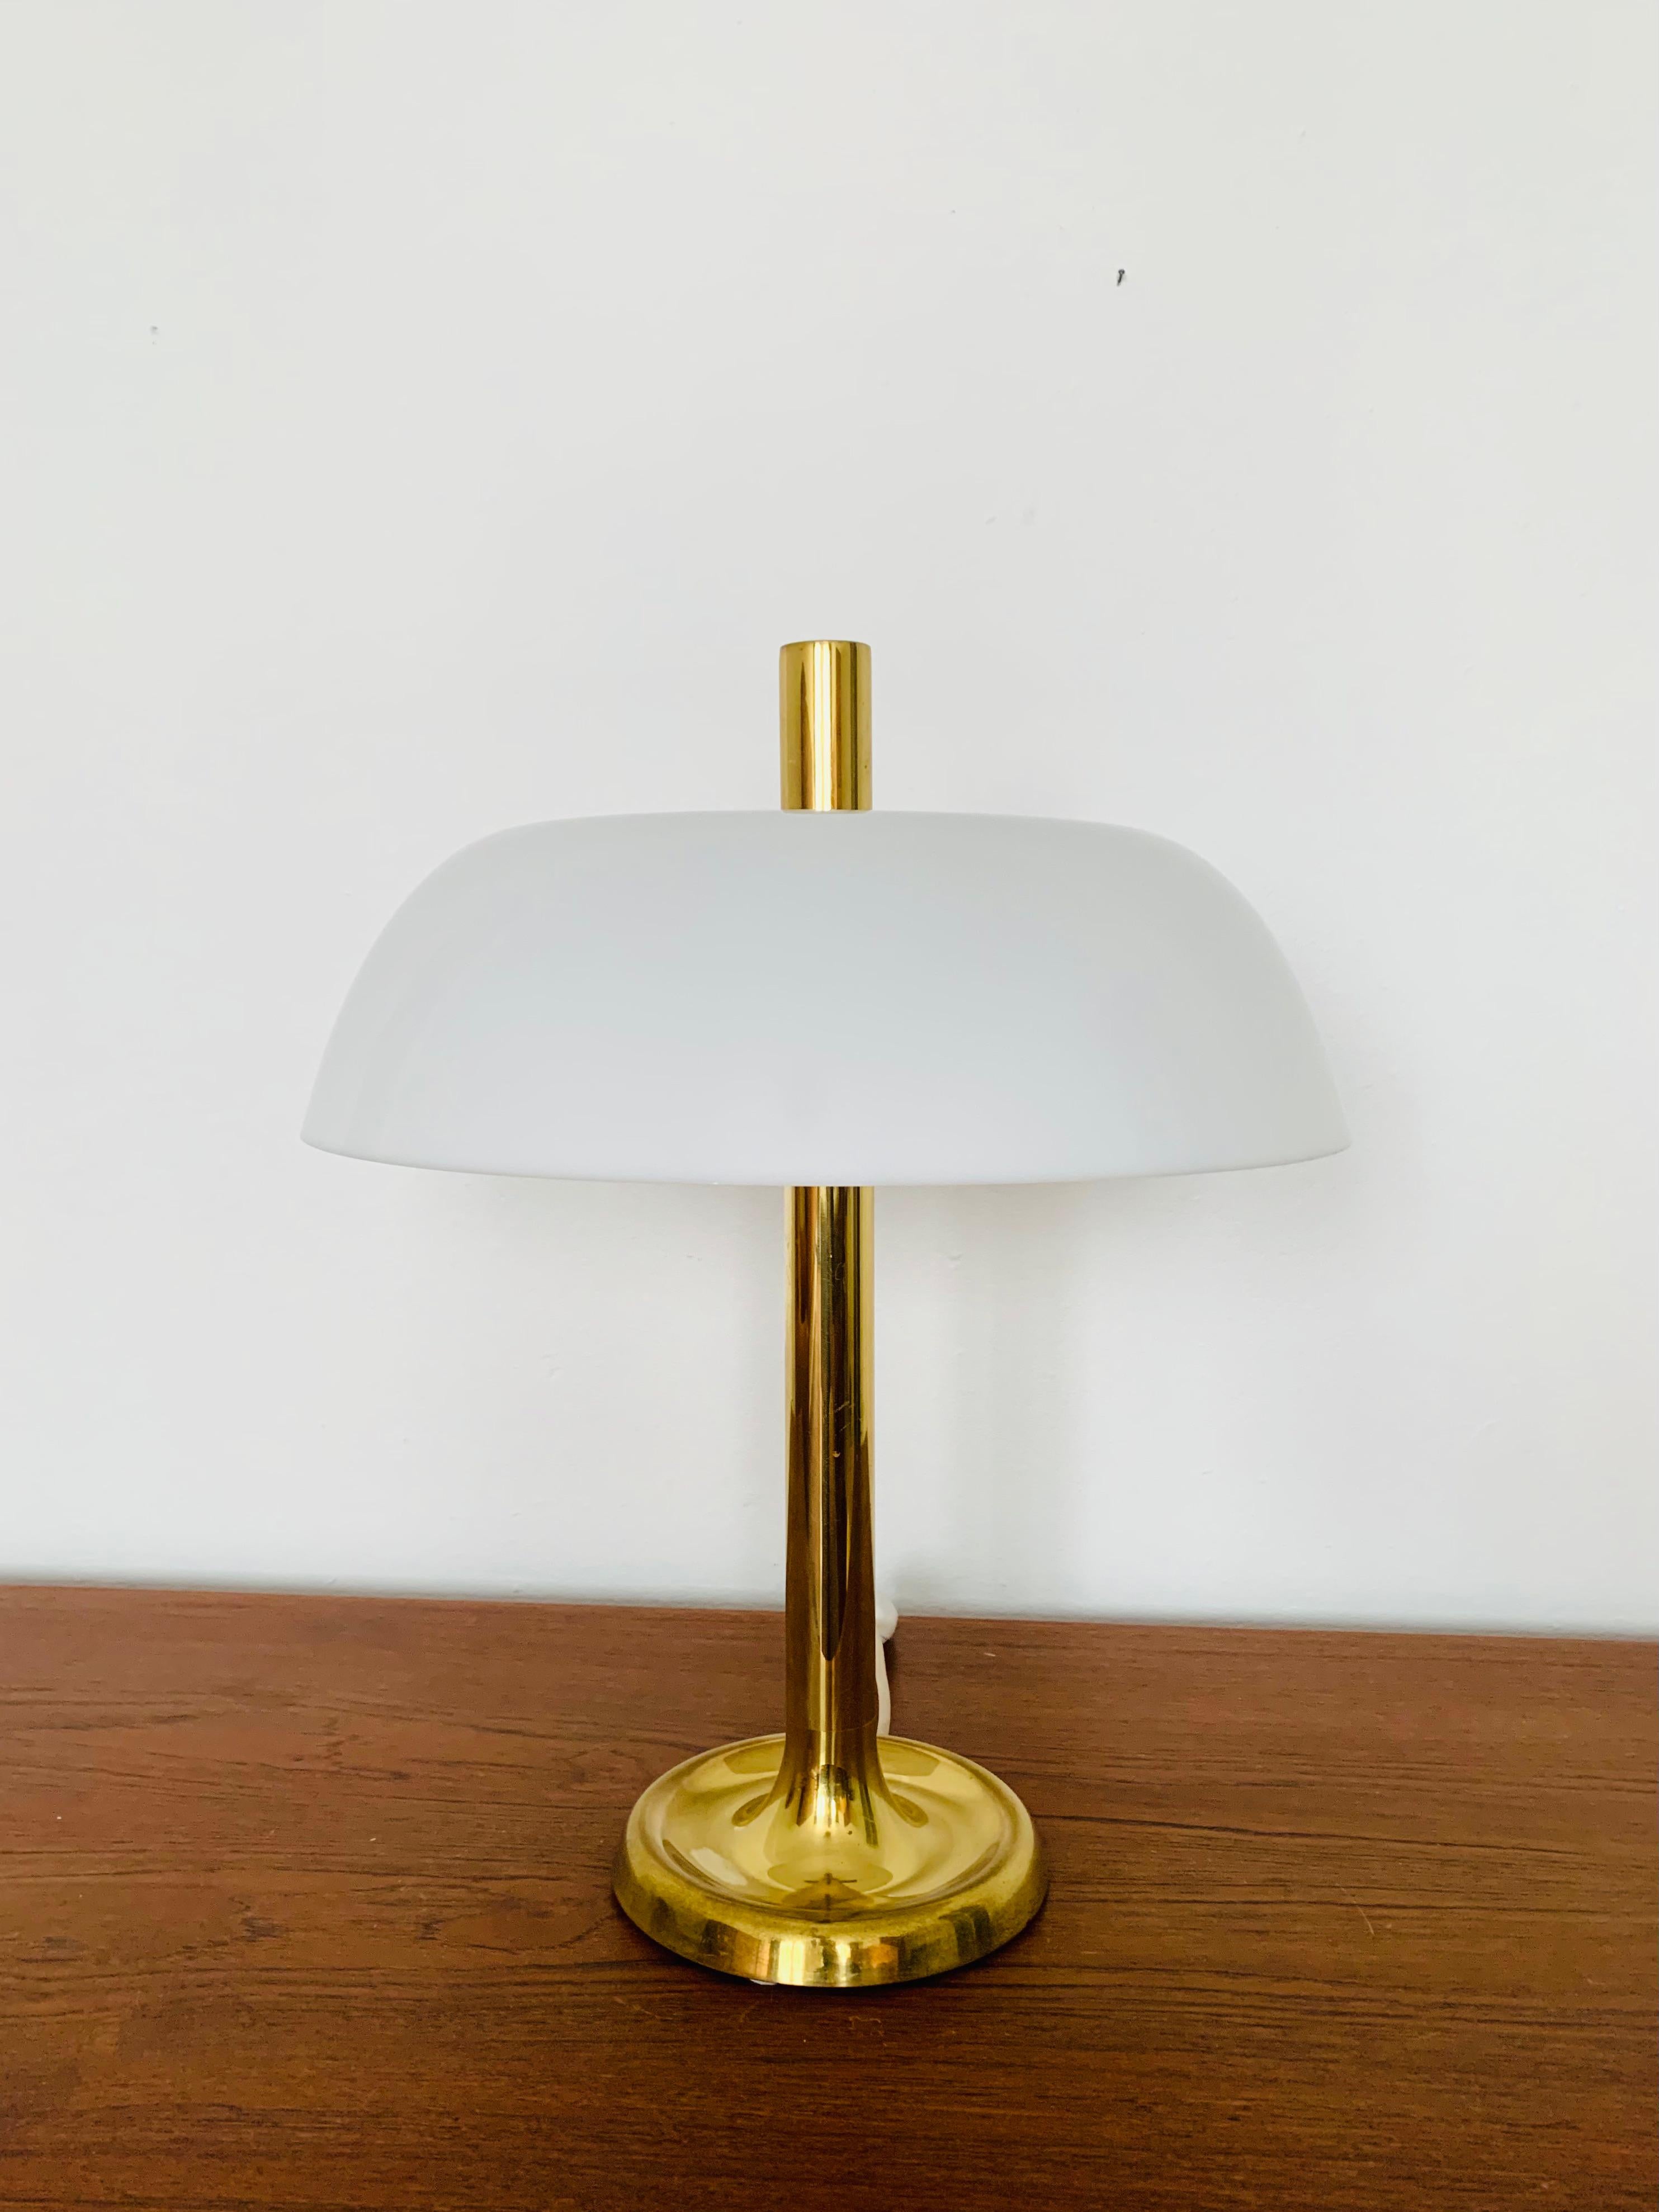 Very nice table lamp or desk lamp from the 1960s.
Wonderful classic design with a very elegant look.
The lamp is an asset to any home.

Manufacturer: Hillebrand

Condition:

Very good vintage condition with slight signs of wear consistent